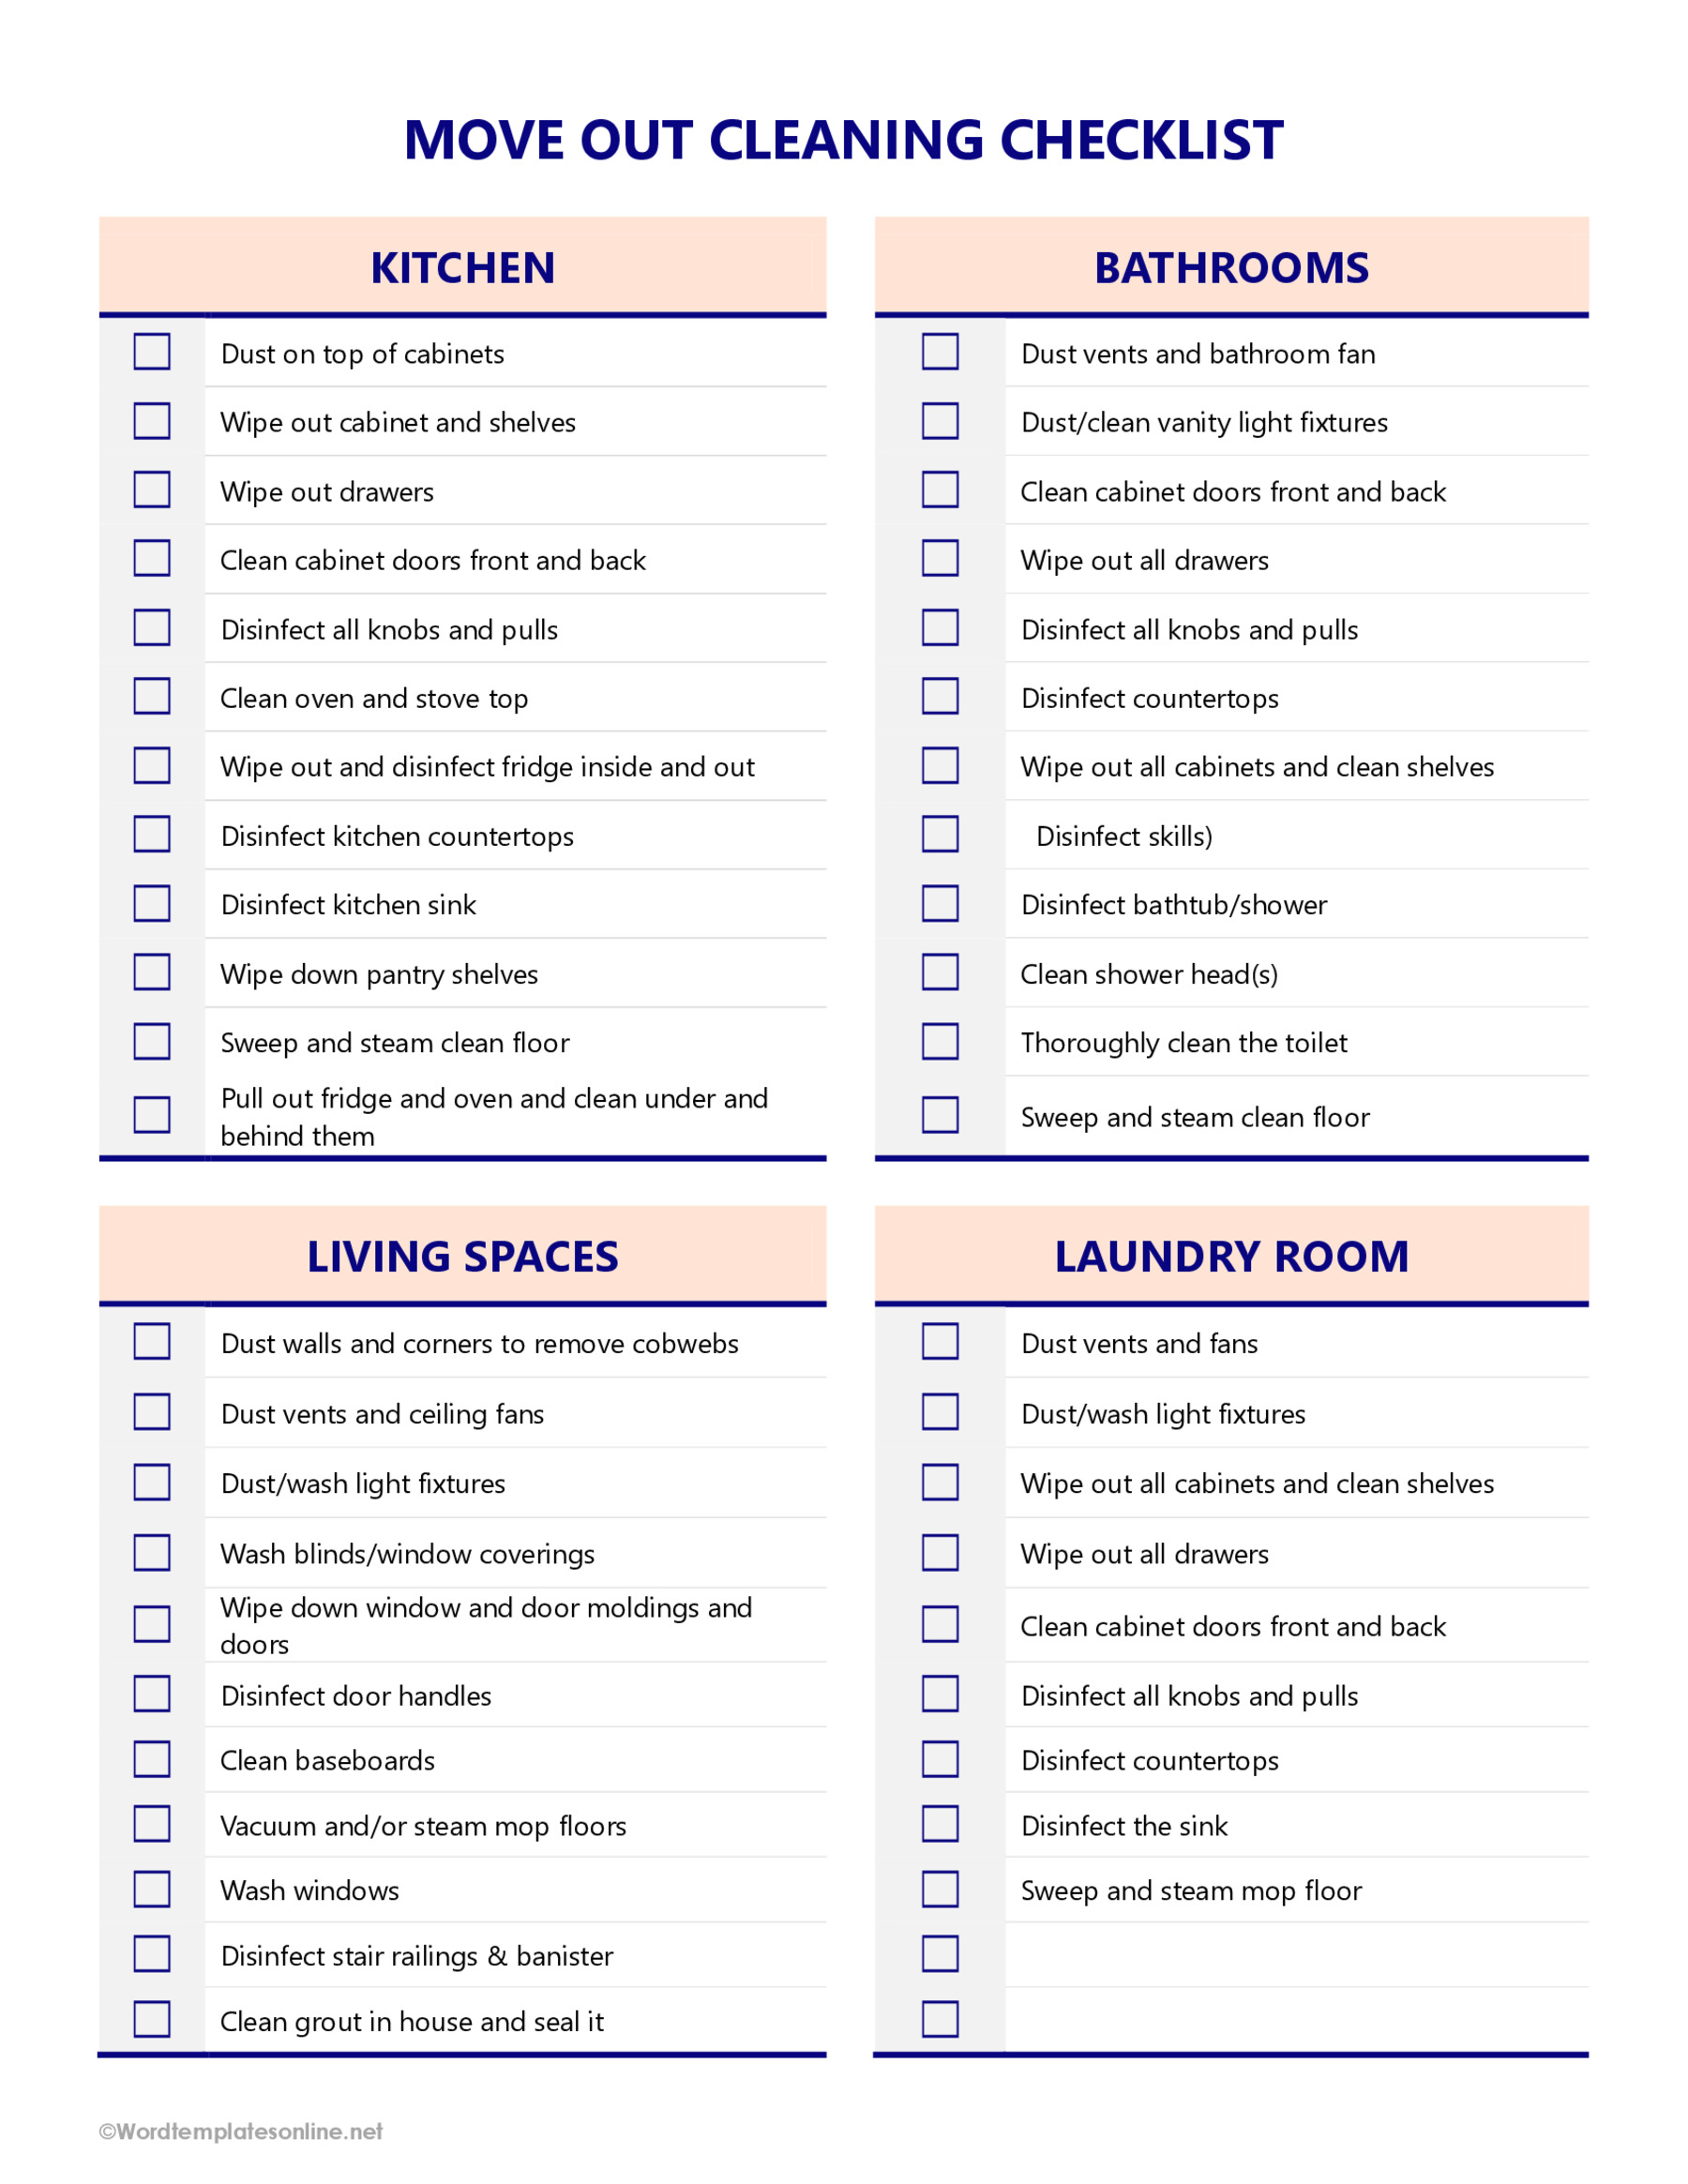 Free Move Out Cleaning Checklist Template Example